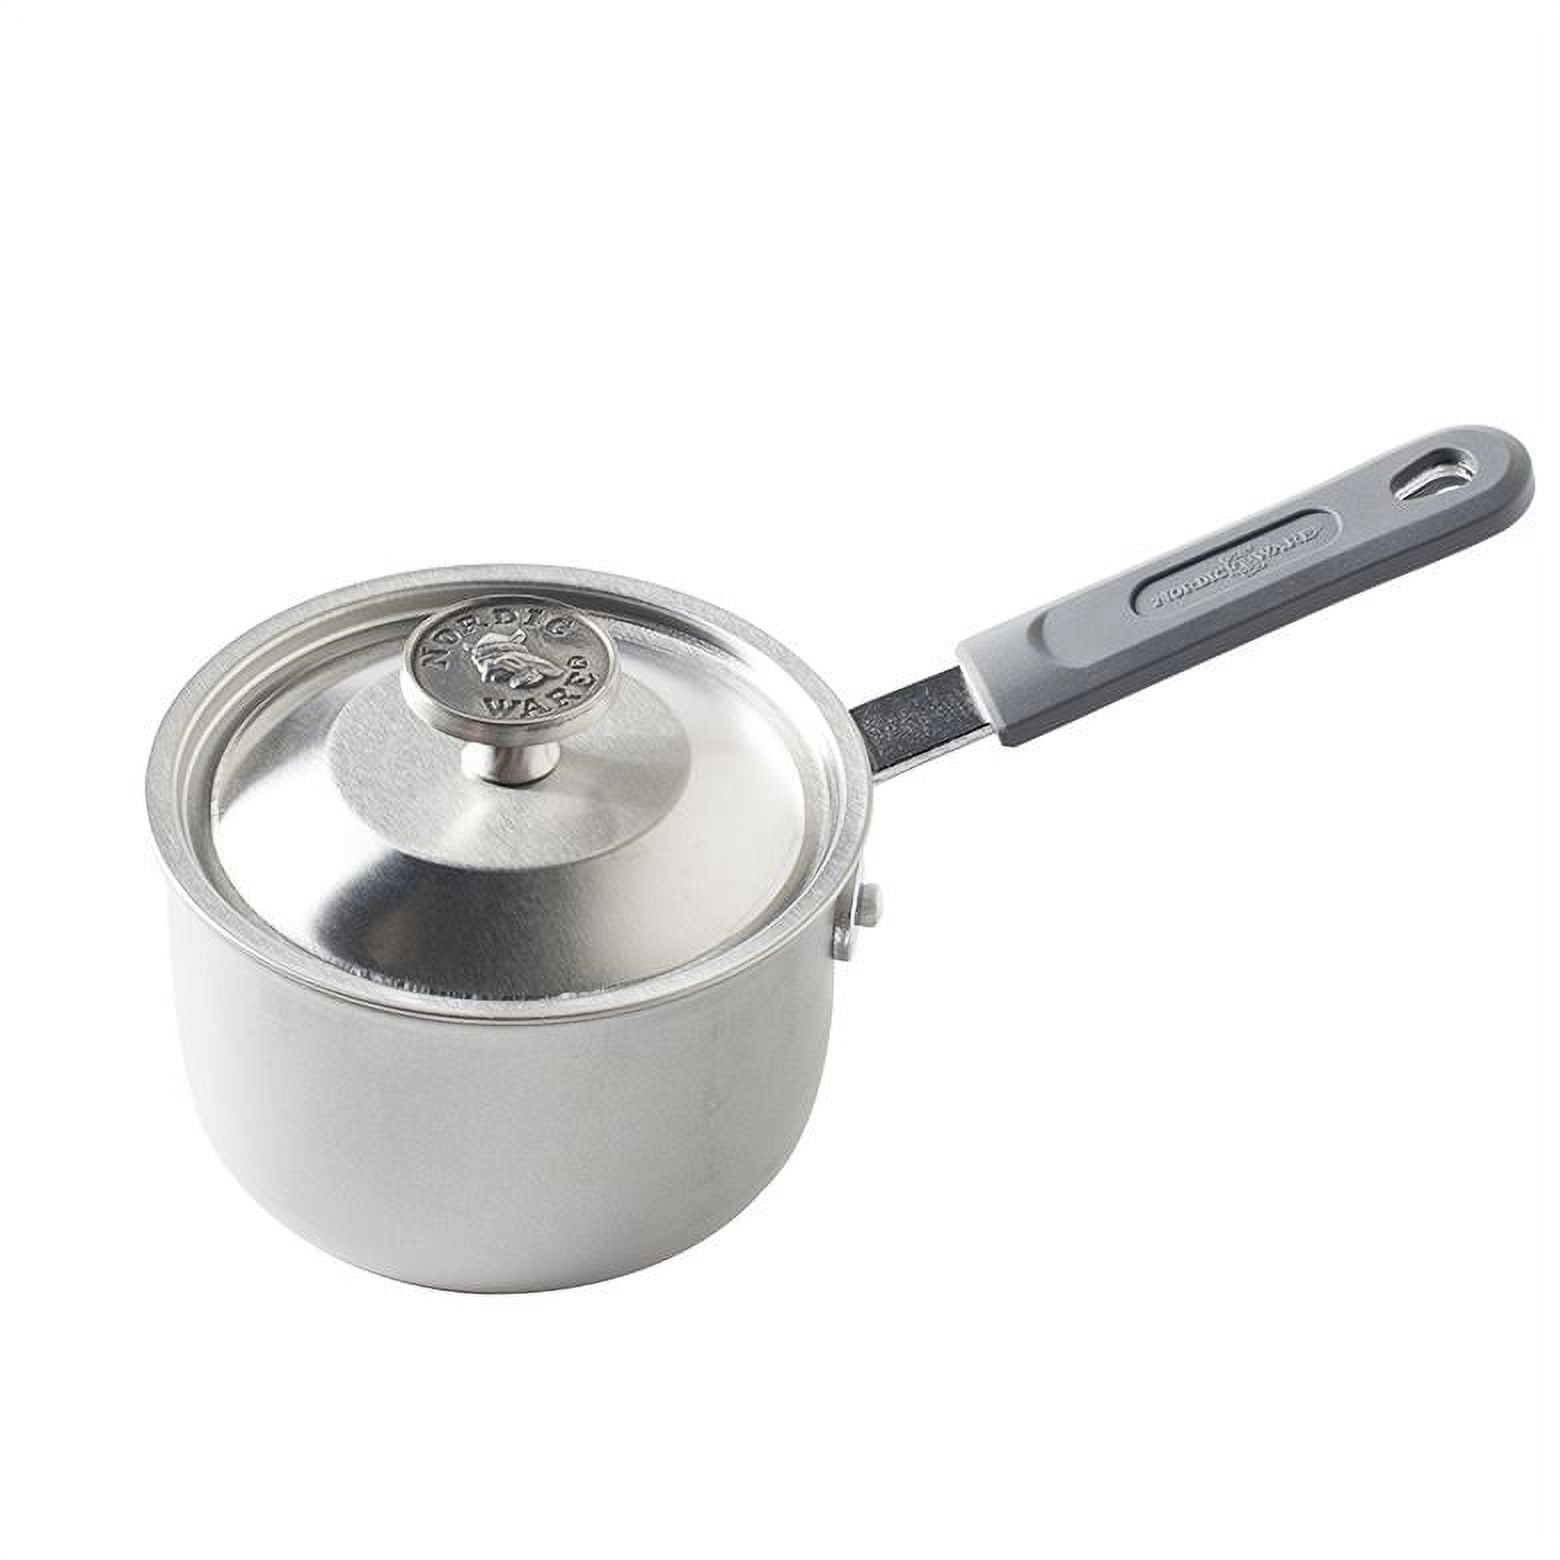 Nordic Ware 1.5 Qt. Sauce Pan with Lid